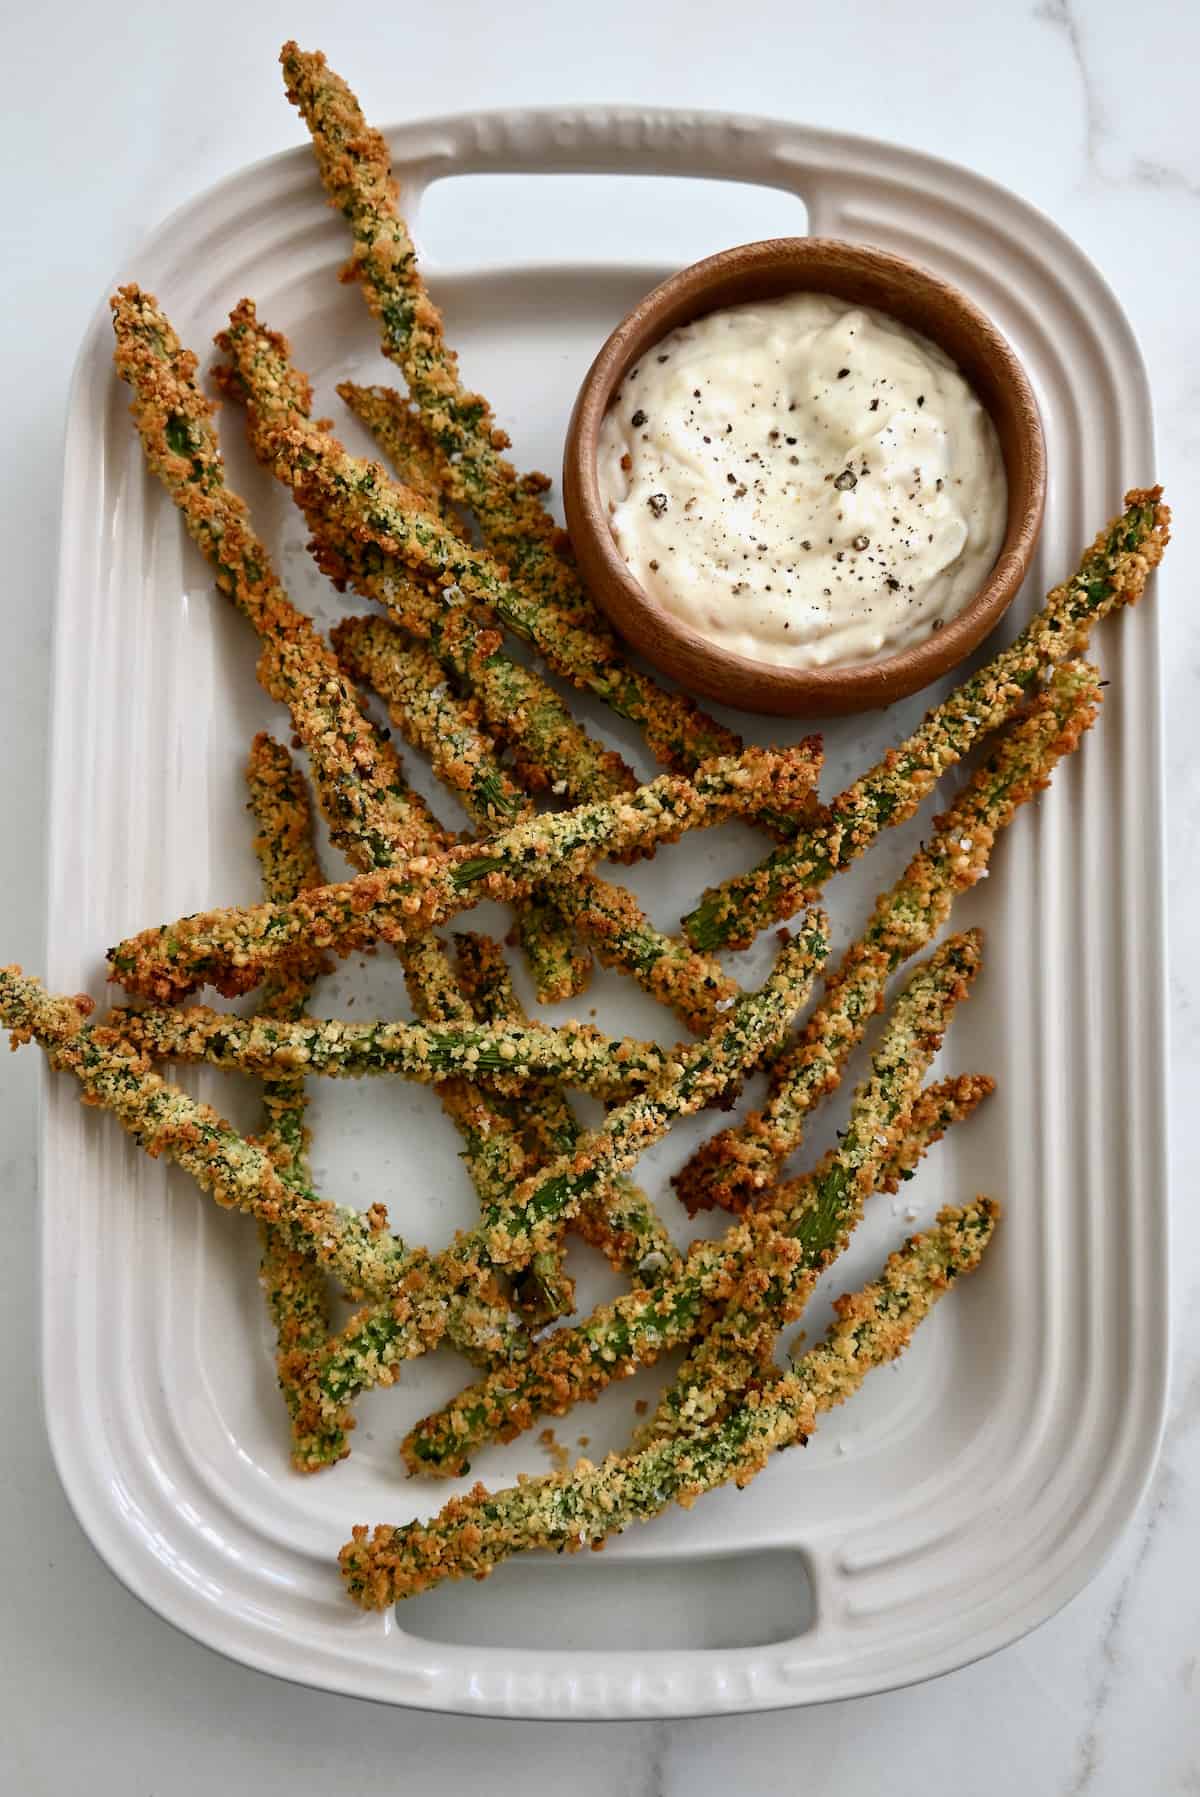 Baked asparagus fries are piled in an oblong white platter, along with a bowl of roasted garlic aioli.